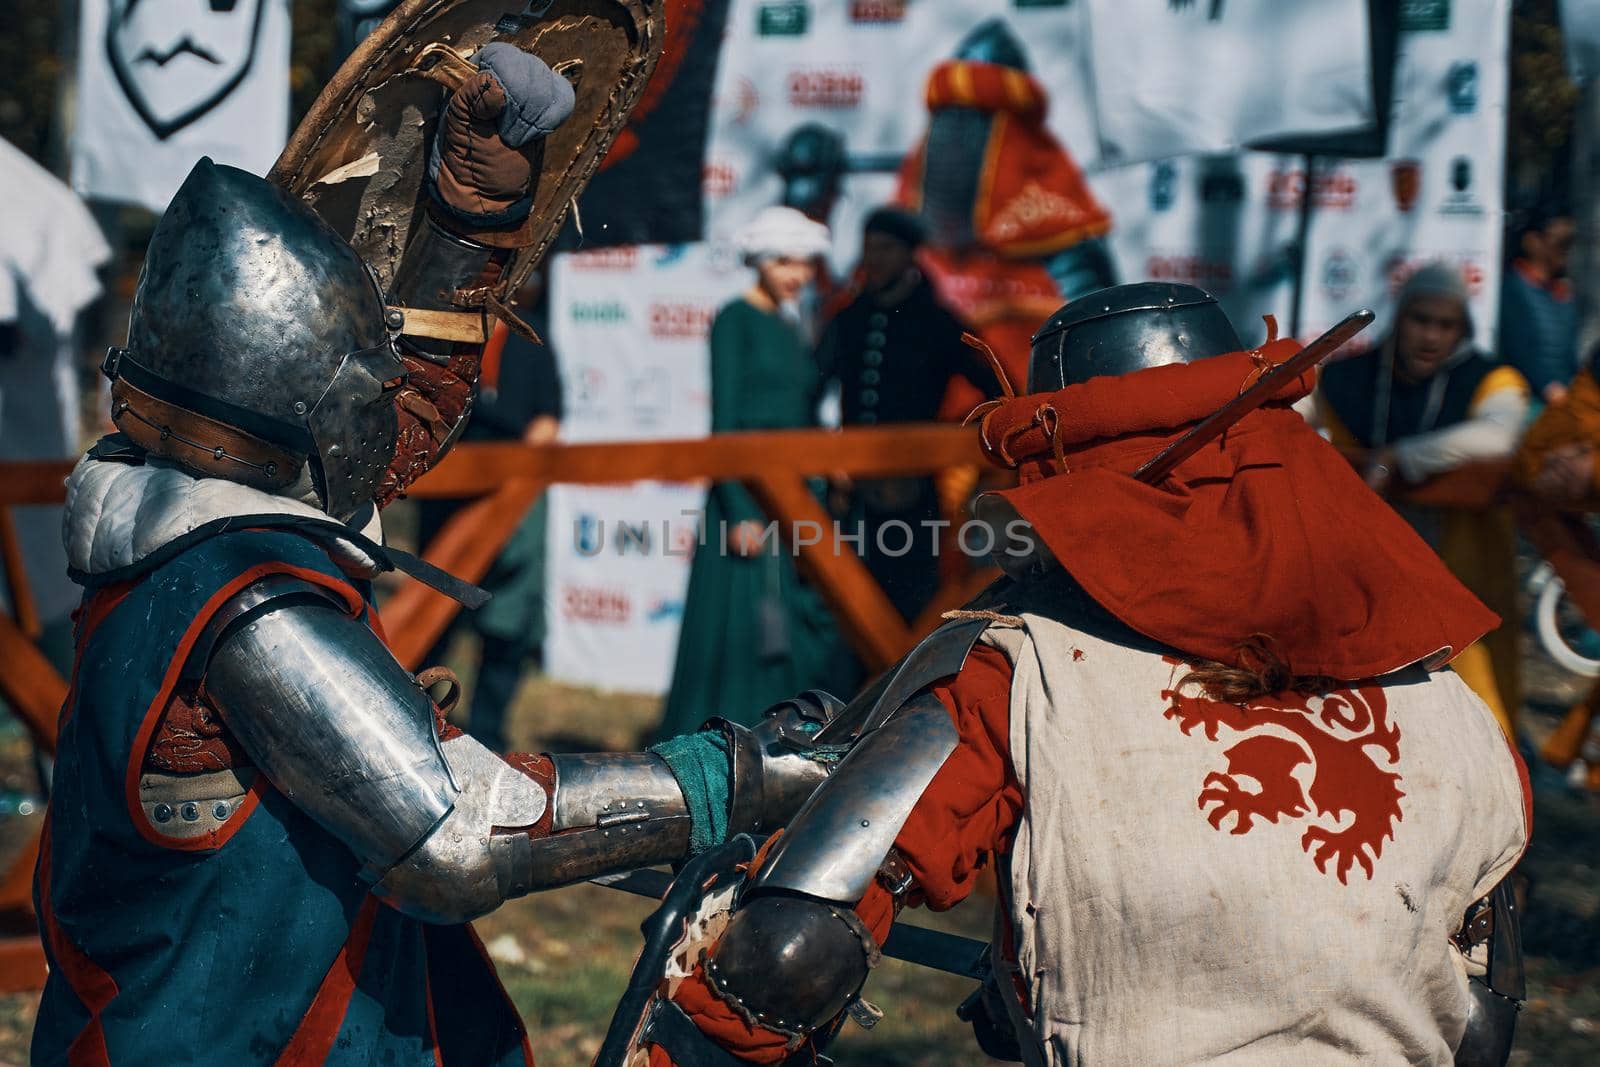 Reconstruction of medieval jousting matches. Battle of two knights from different historical clubs in the arena. Sword fighting. Bishkek, Kyrgyzstan - October 13, 2019